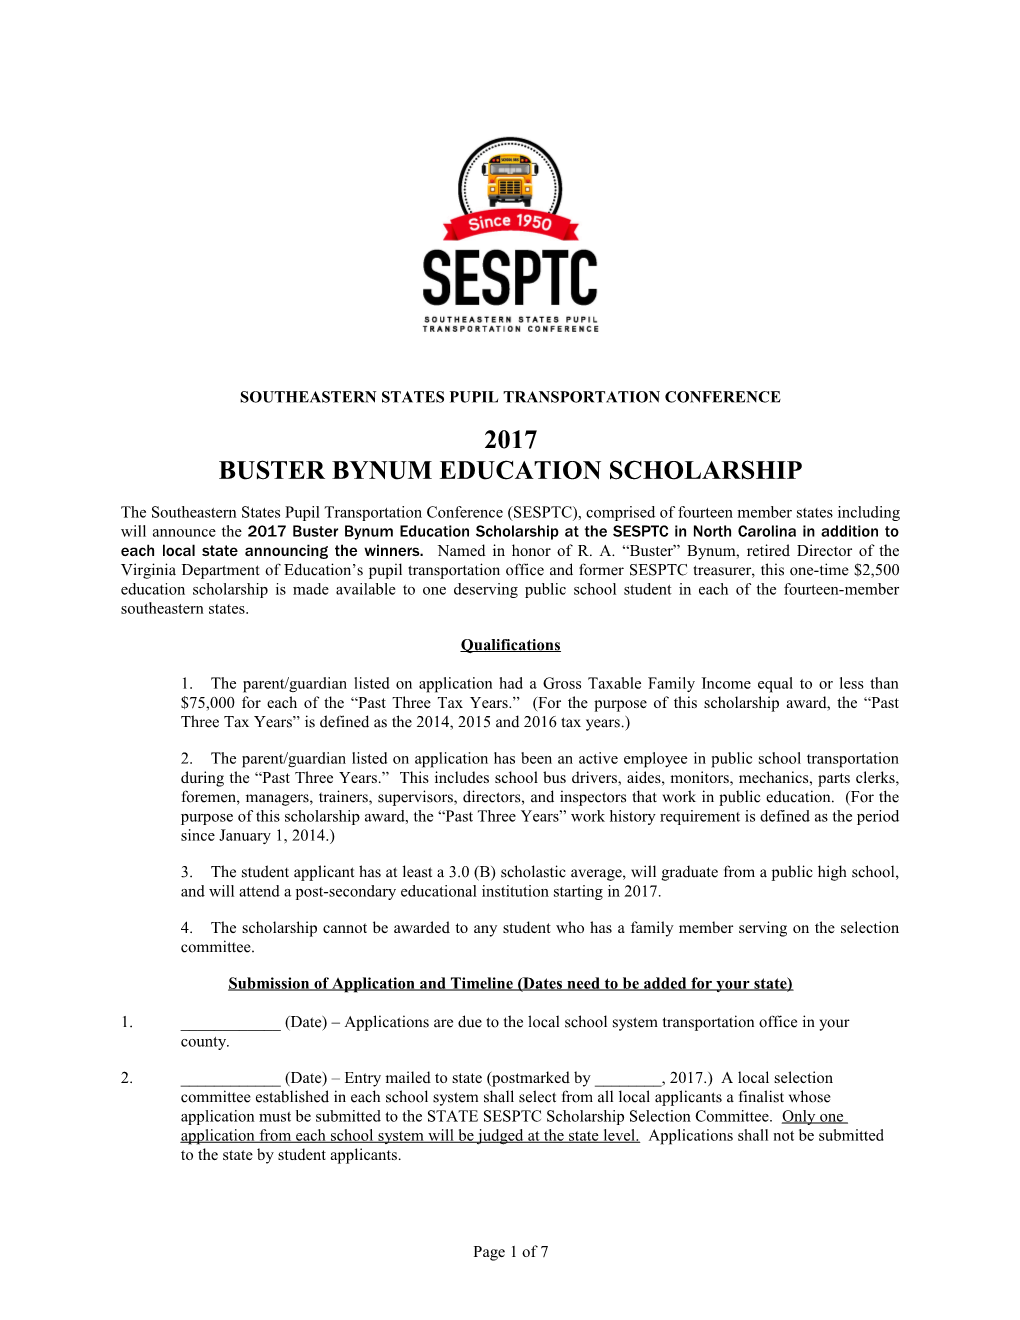 Buster Bynum Scholarship s1